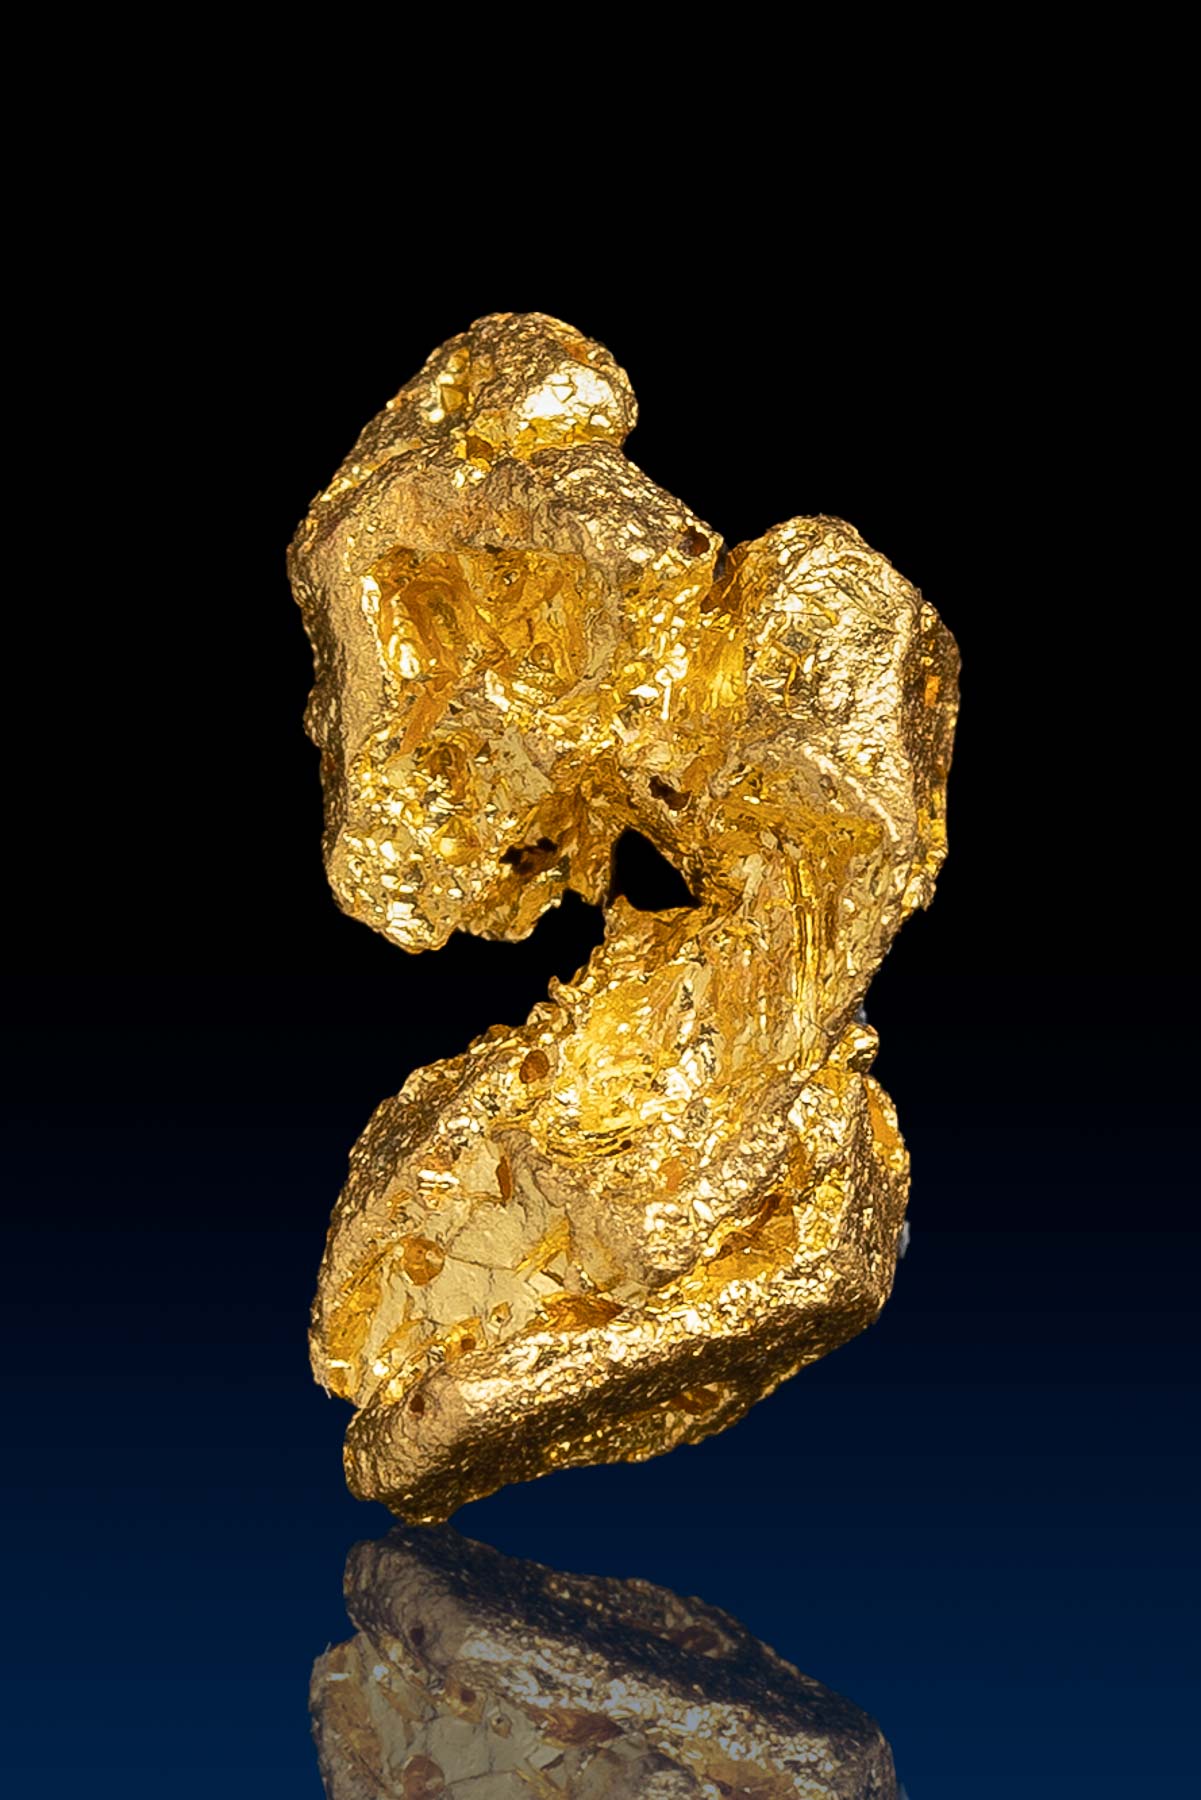 Brilliant Curved Gold Crystal from Alta Floresta, Brazil